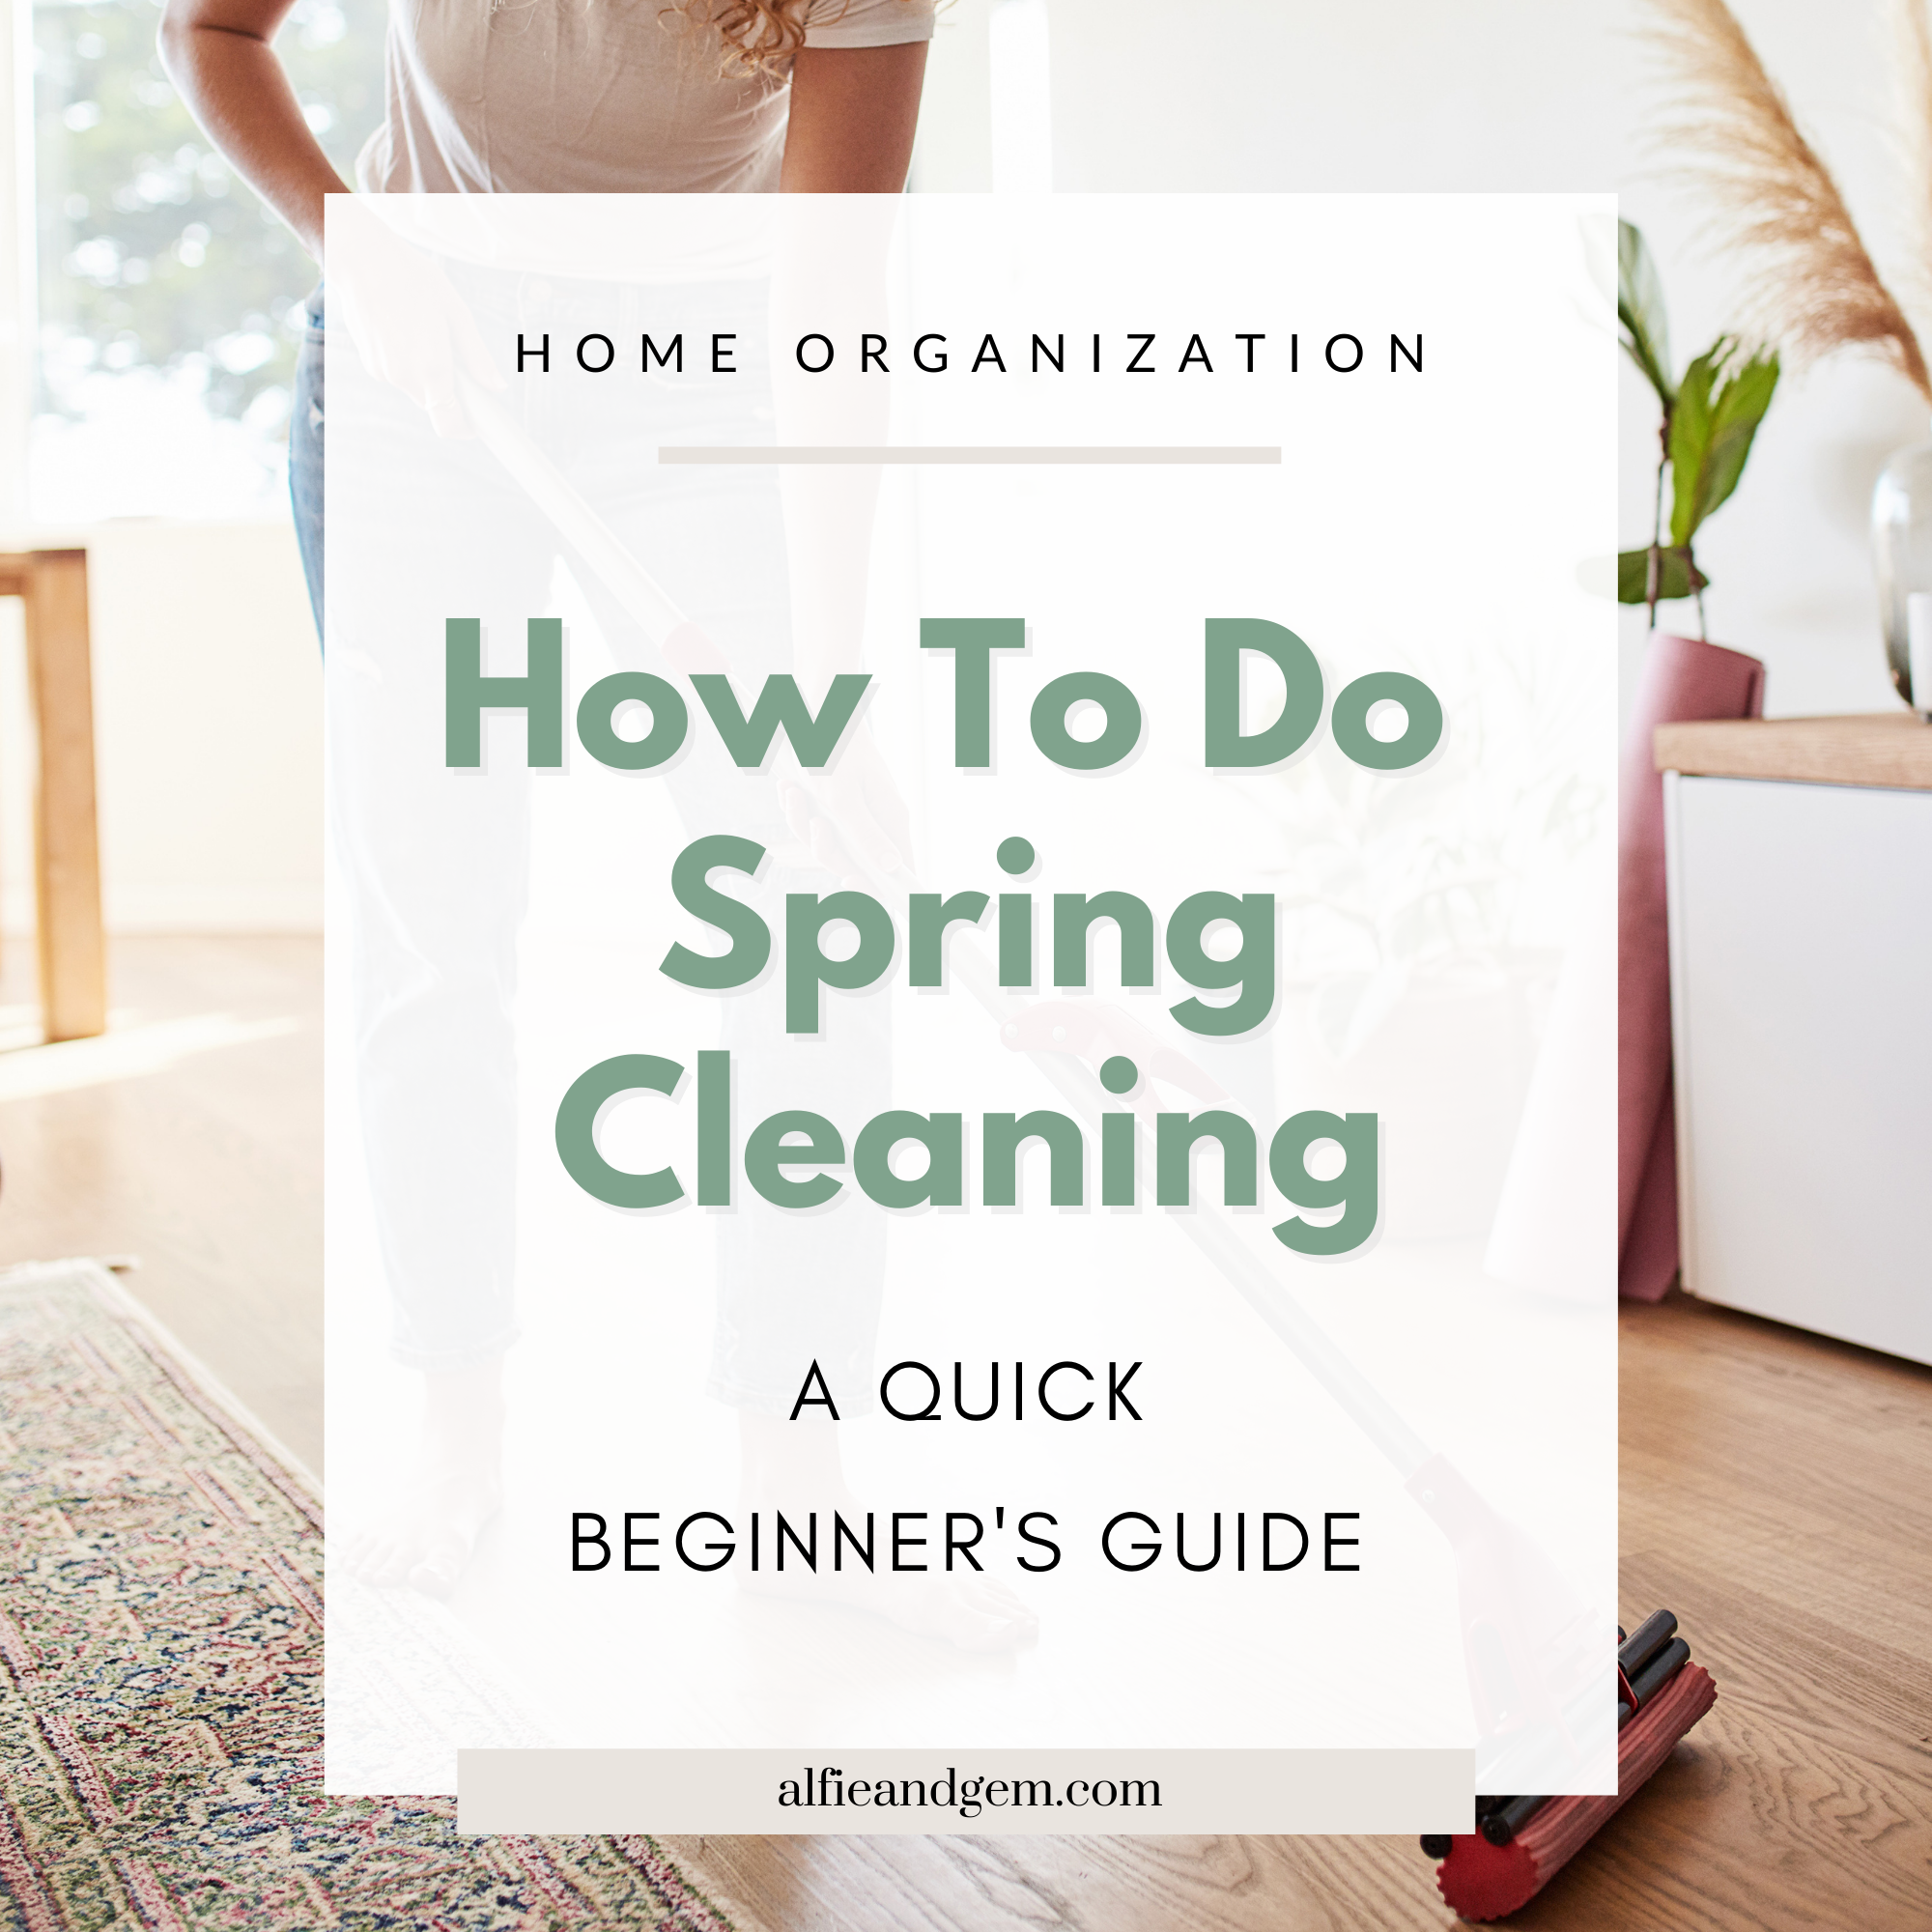 The Quick Beginner’s Guide To Spring Cleaning Your Home